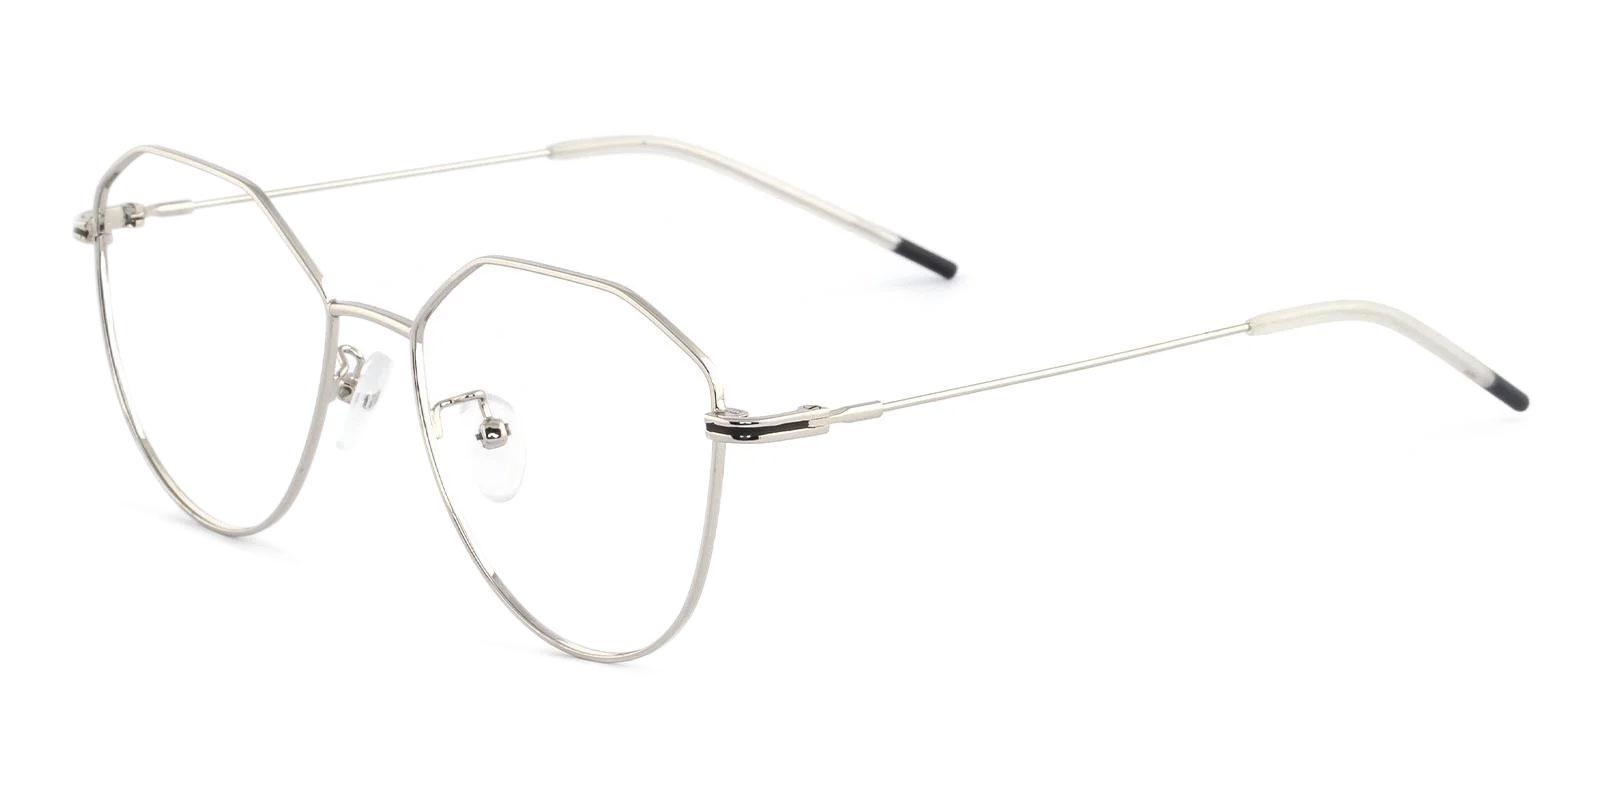 Layla Silver Metal Eyeglasses , Lightweight , NosePads Frames from ABBE Glasses